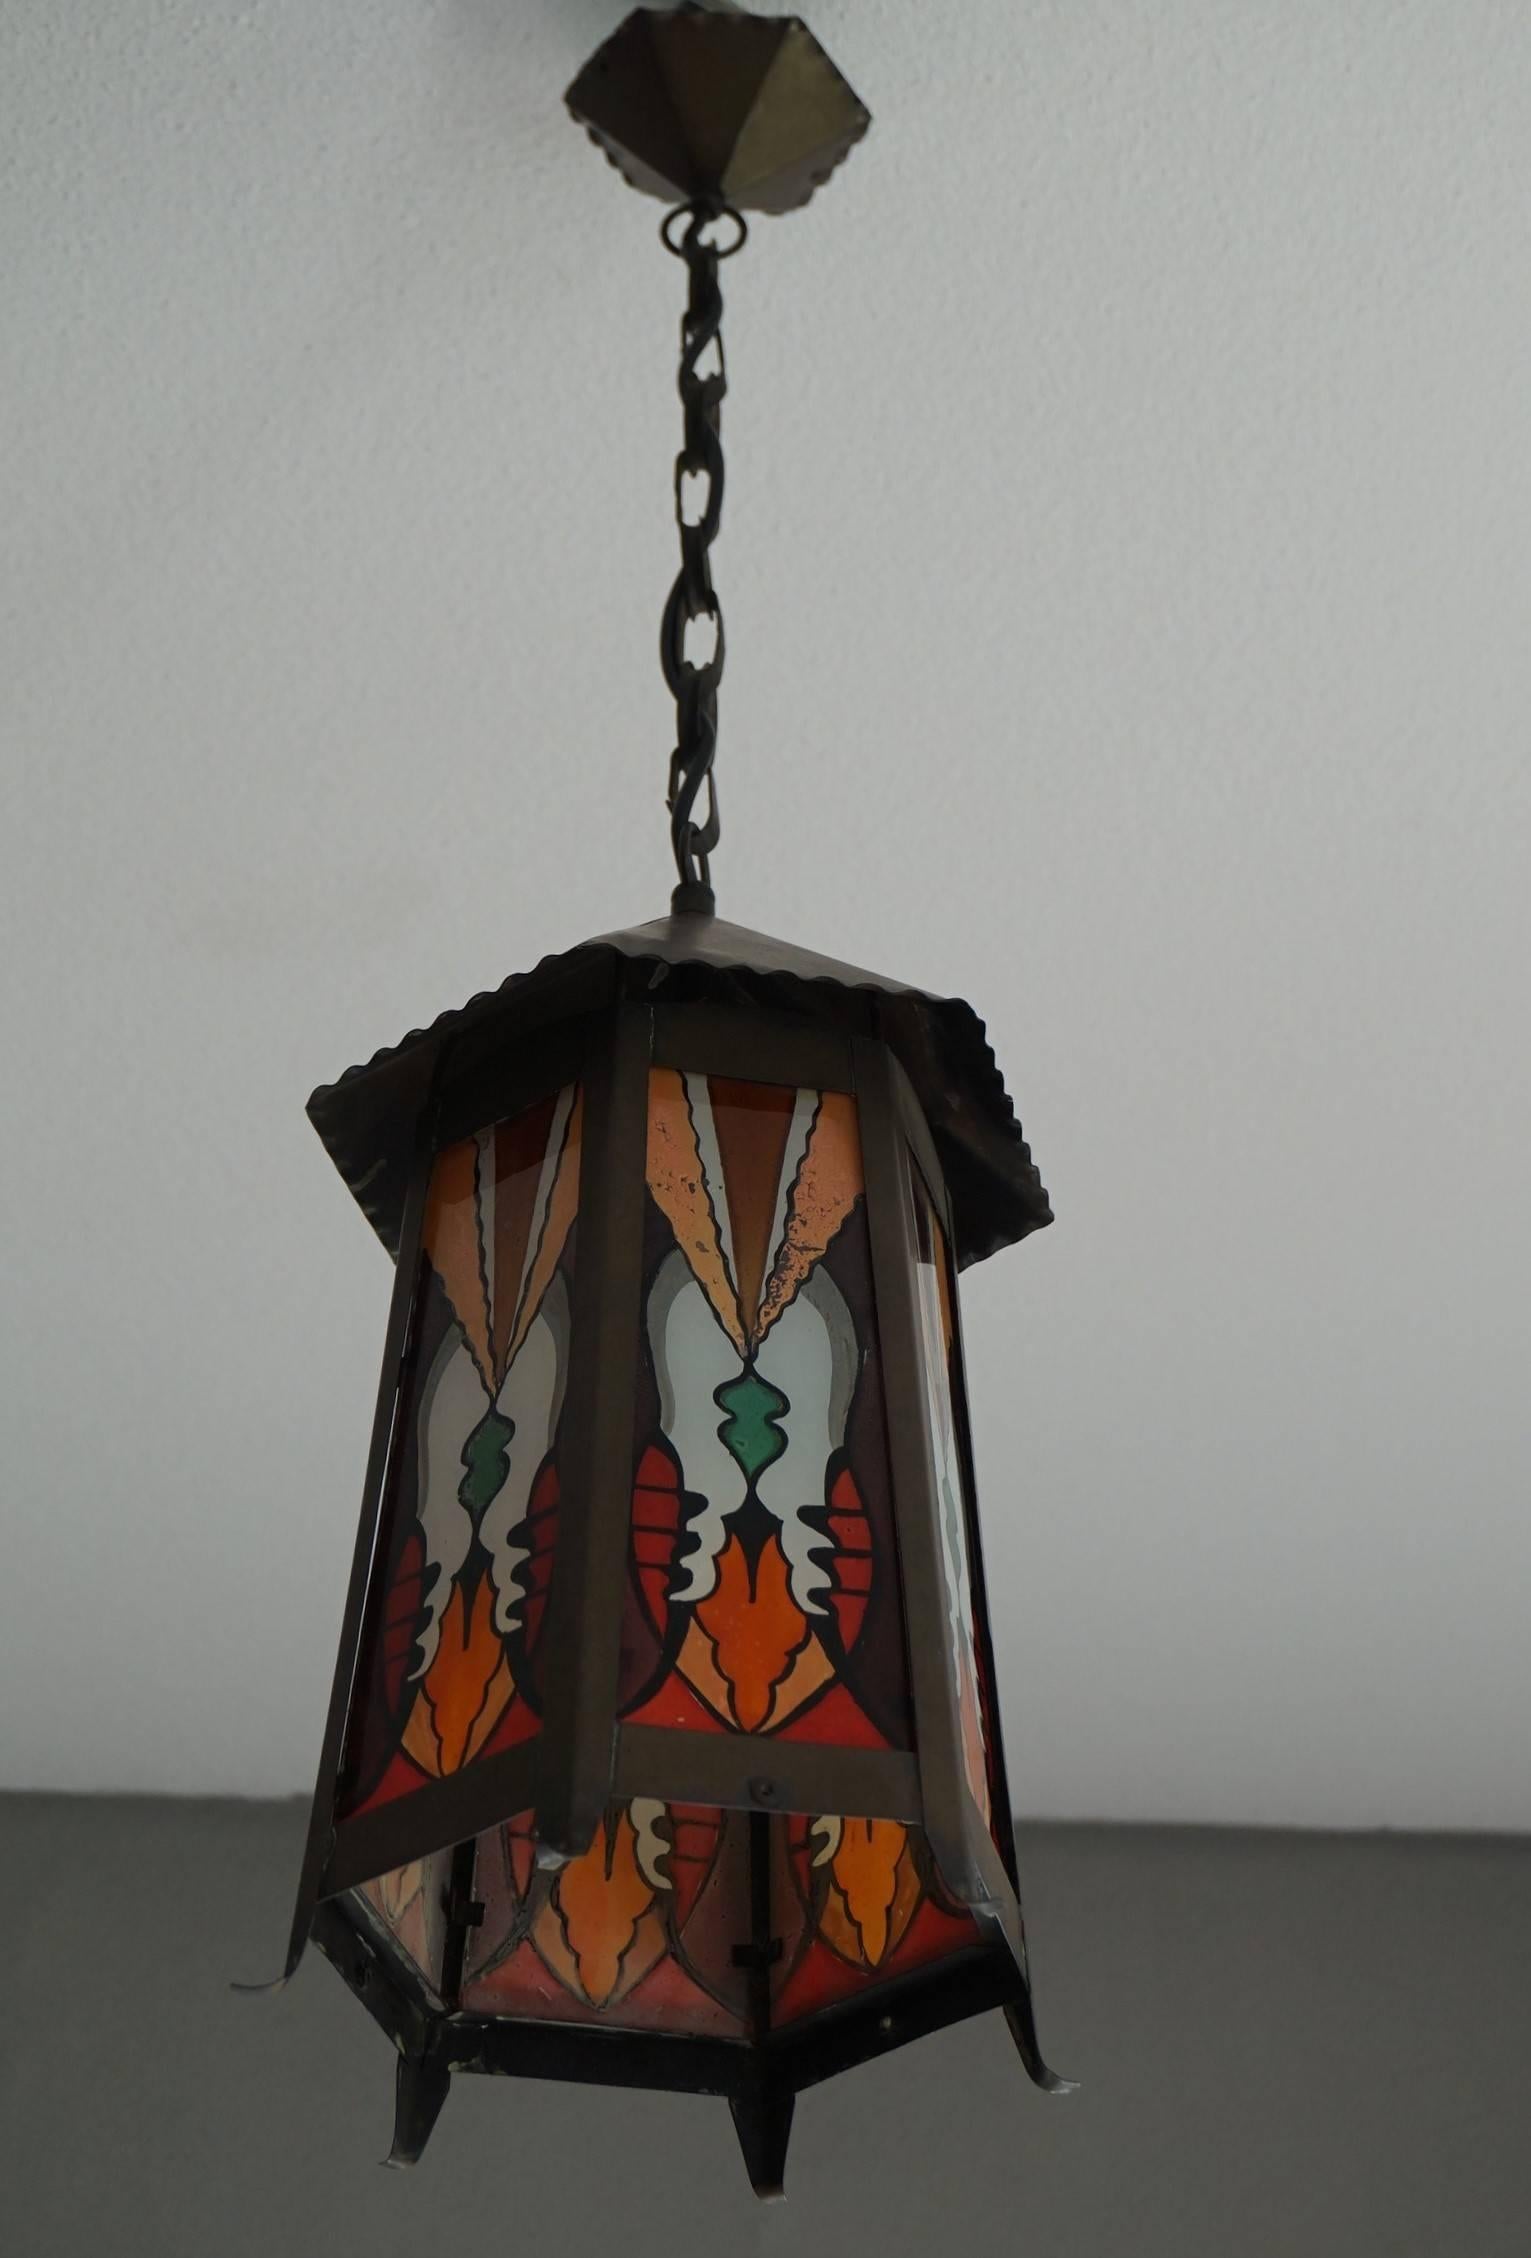 Colorful and stylish light fixture from the early 1900's.

This rare and highly stylish lantern was made in early 20th century Amsterdam and the colors of the painted glass combined with the marvellous patina of the hexagonal brass frame is a lovely